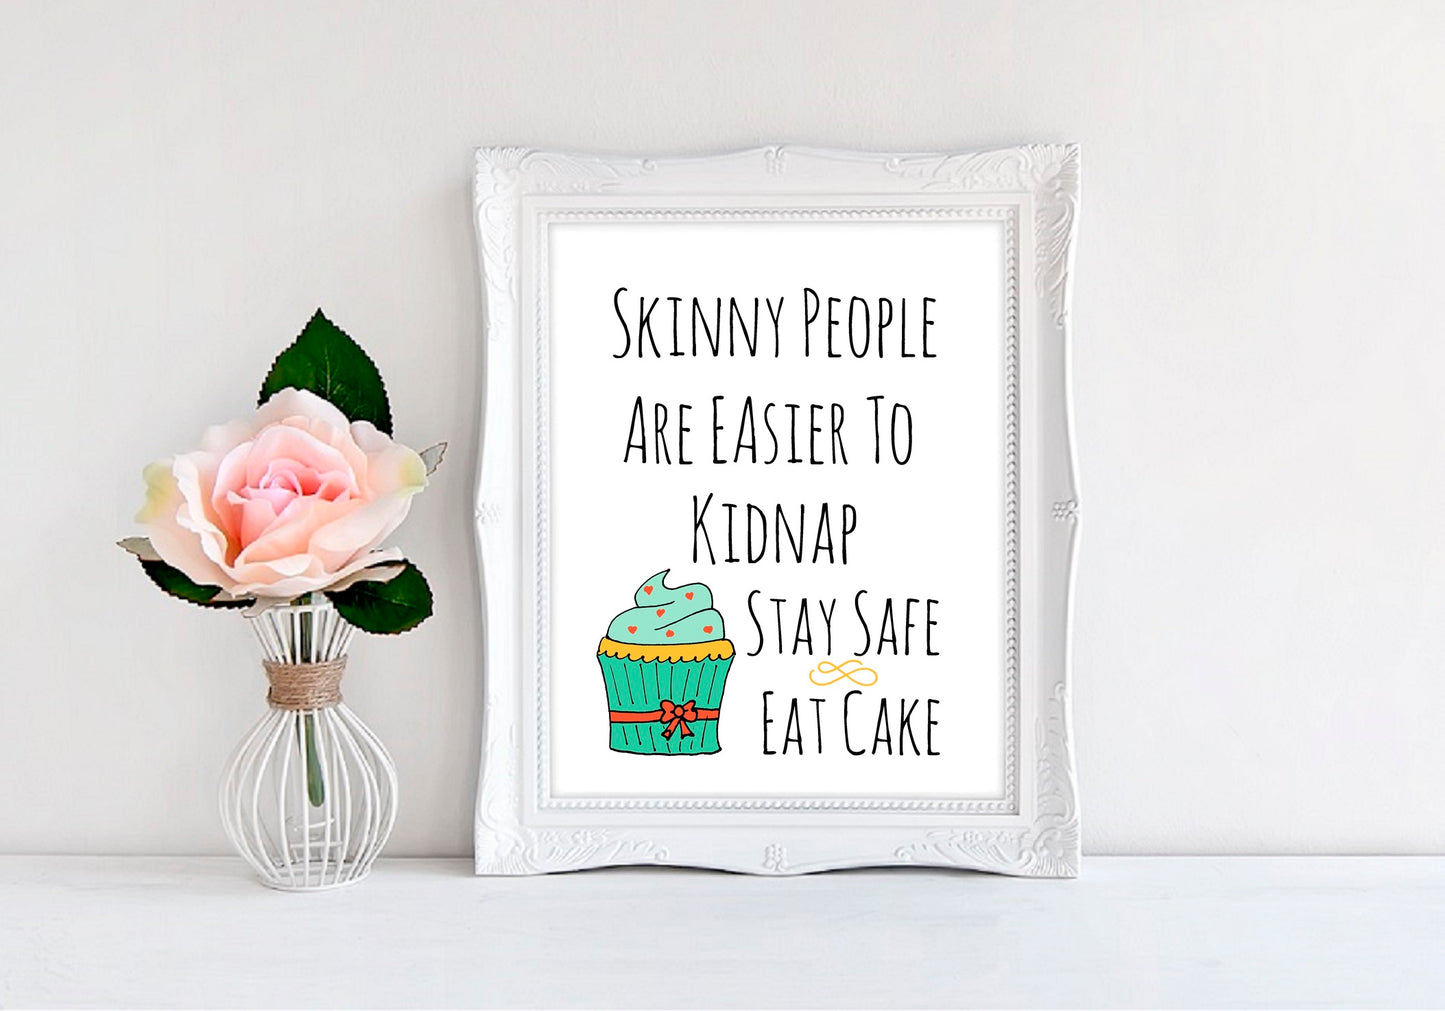 Skinny People Are Easier To Kidnap Stay Safe Eat Cake - 8"x10" Wall Print - MoonlightMakers